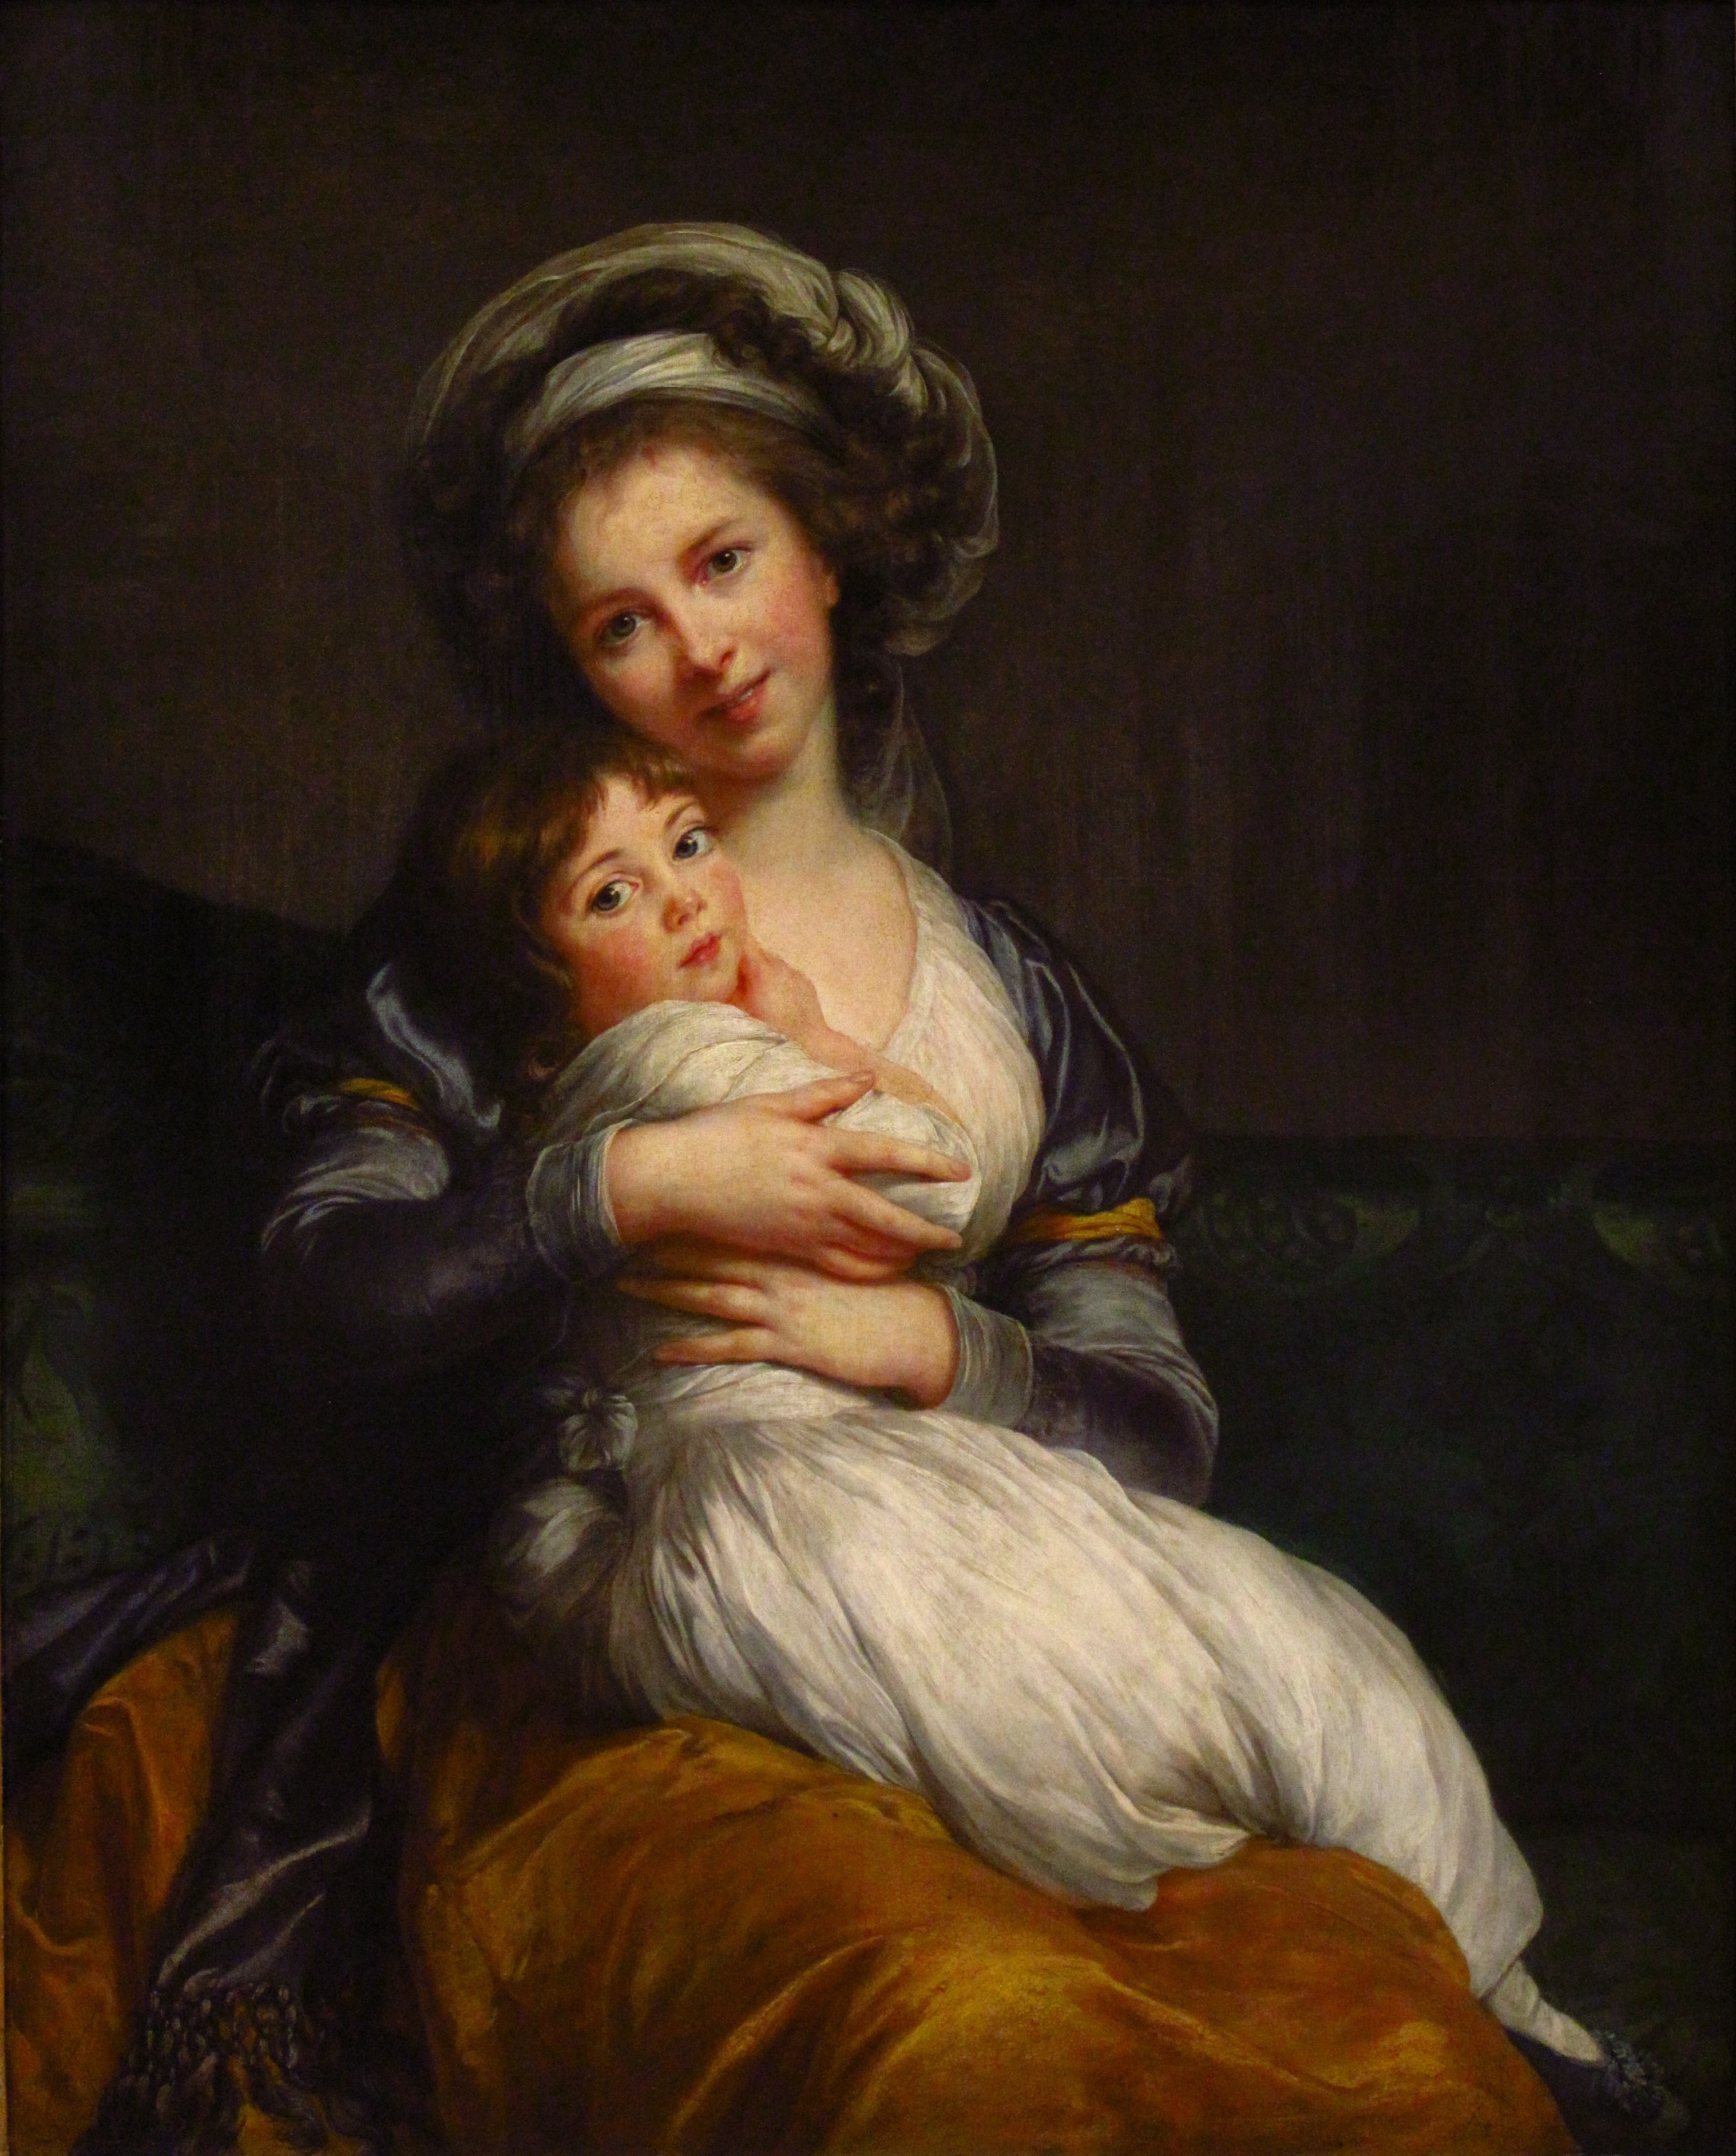 Self portrait of woman holding her young daughter in her lap